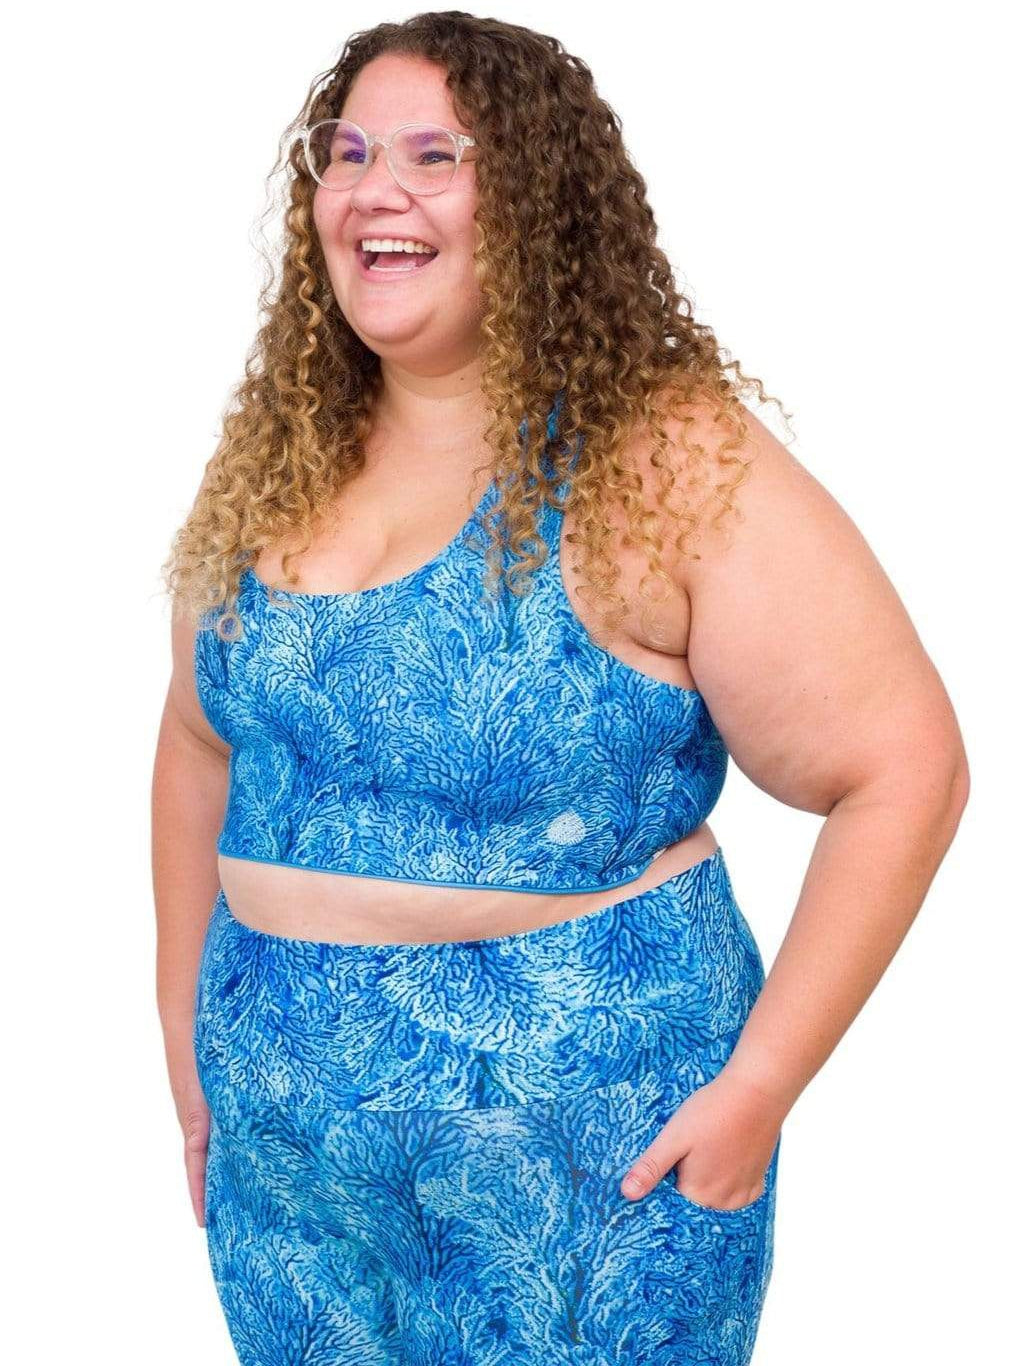 Model: Angela is working towards her Master of Professional Science in Marine Conservation. She is 5'6", 235 lbs, 42E and is wearing a 2XL top and legging.